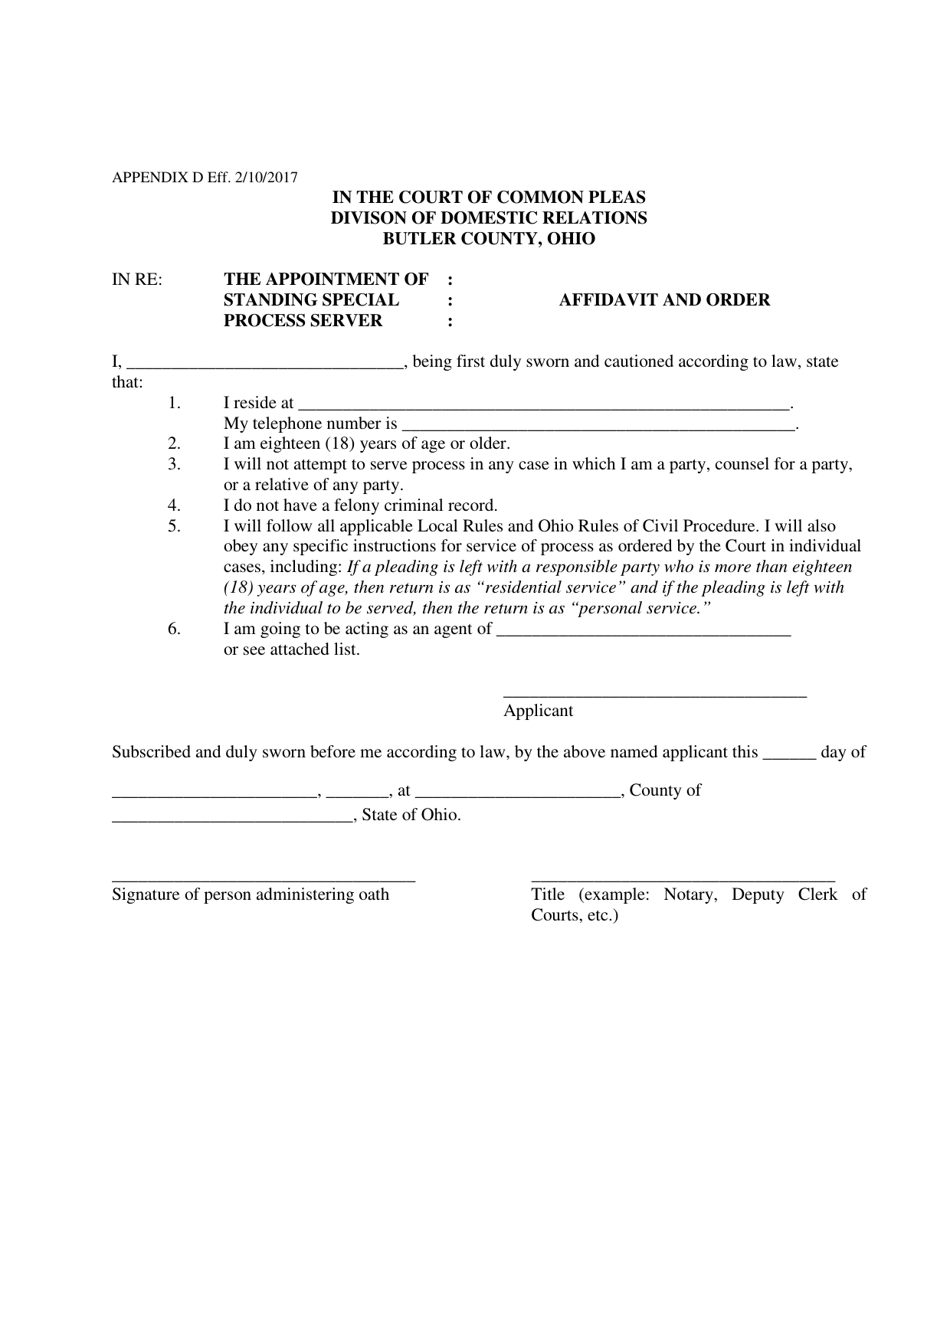 Appendix D Affidavit and Order for Standing Process Server - Butler County, Ohio, Page 1